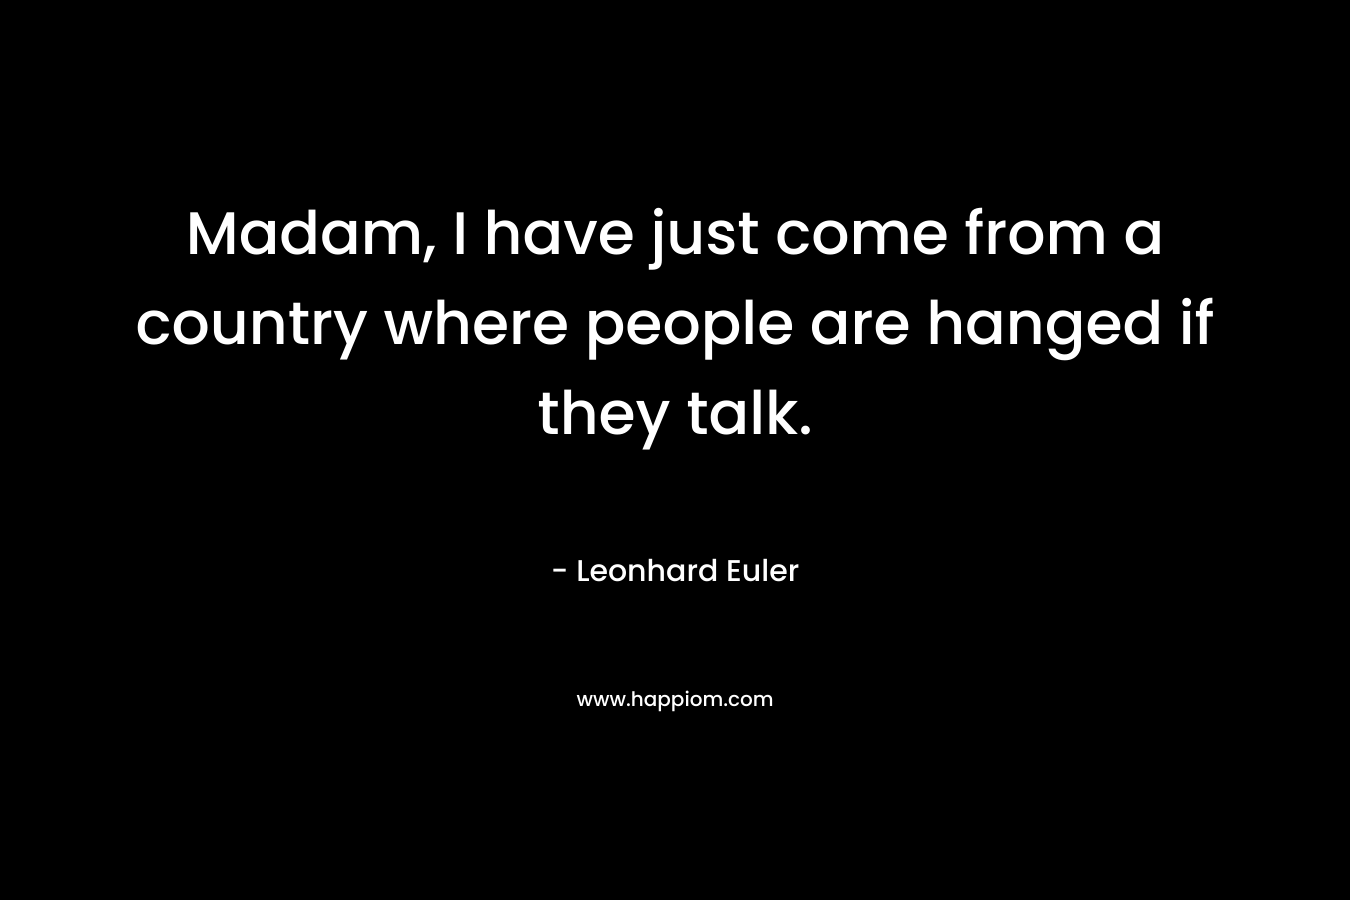 Madam, I have just come from a country where people are hanged if they talk. – Leonhard Euler